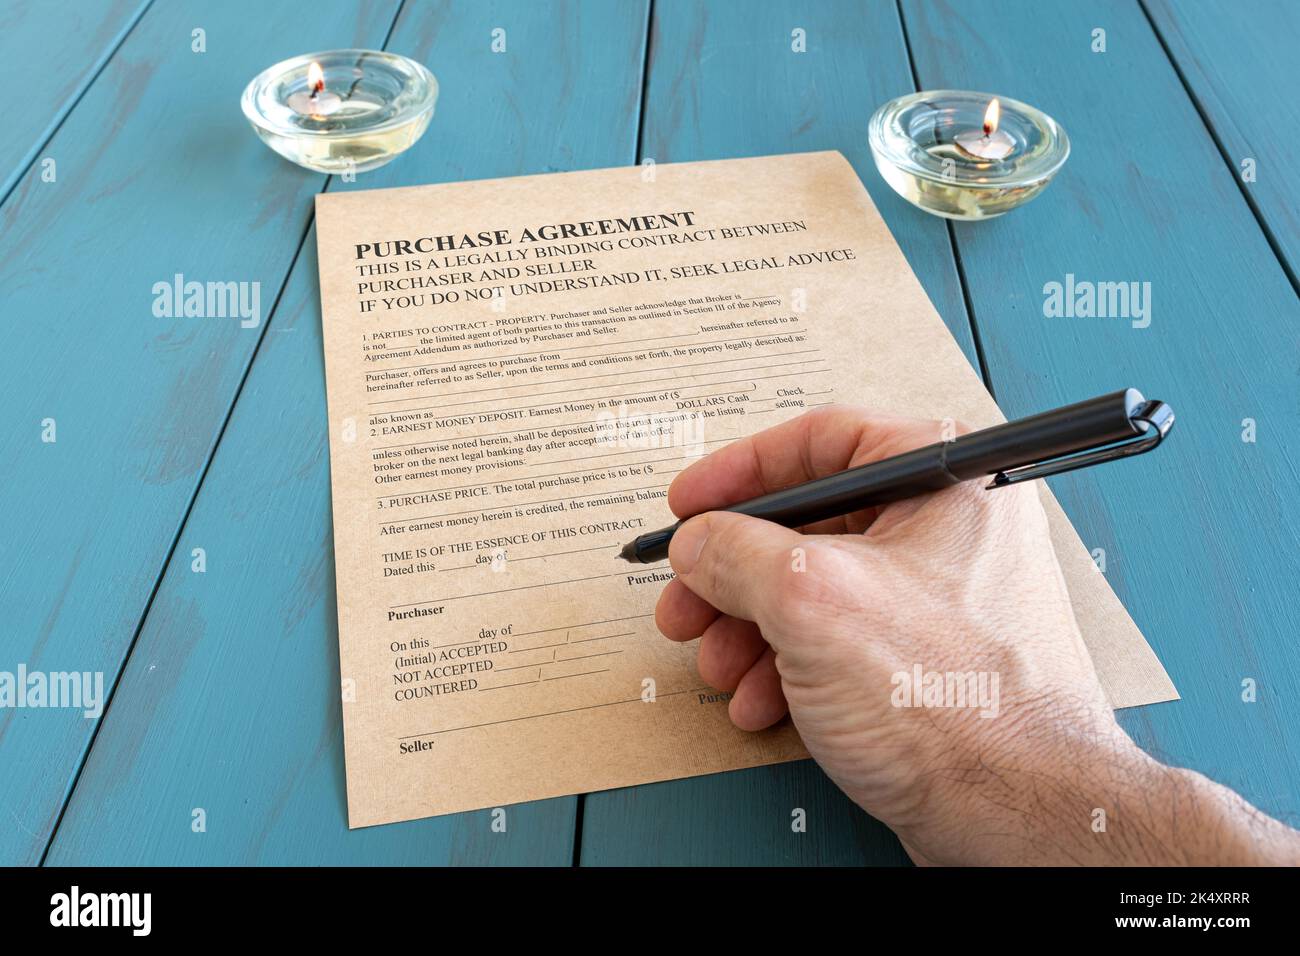 Man's hand with fountain pen signing contract next to lit candles. Stock Photo